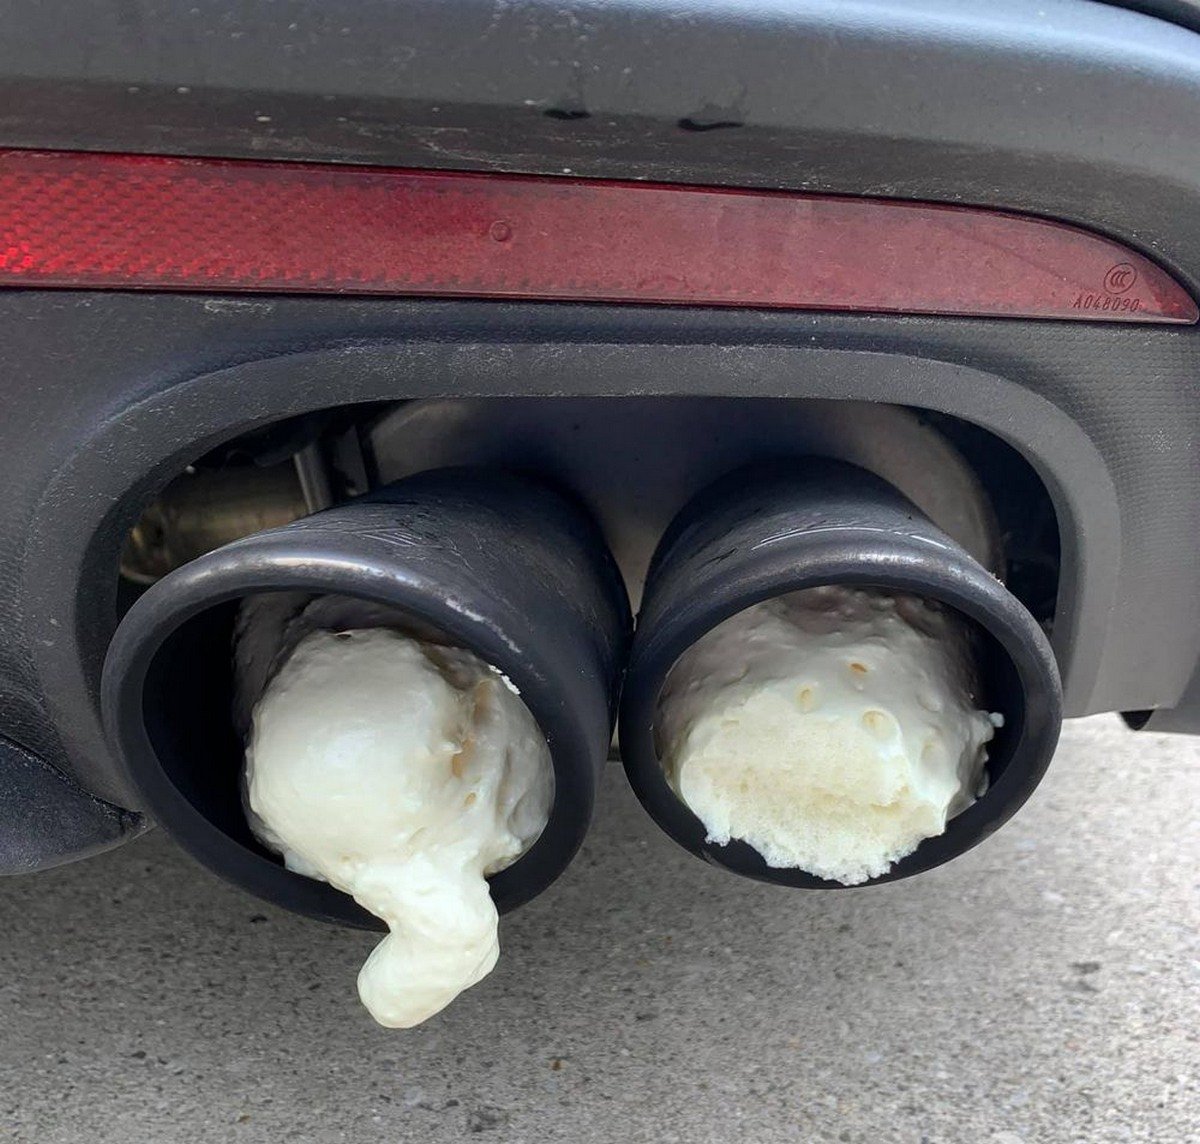 foam from car exhausts